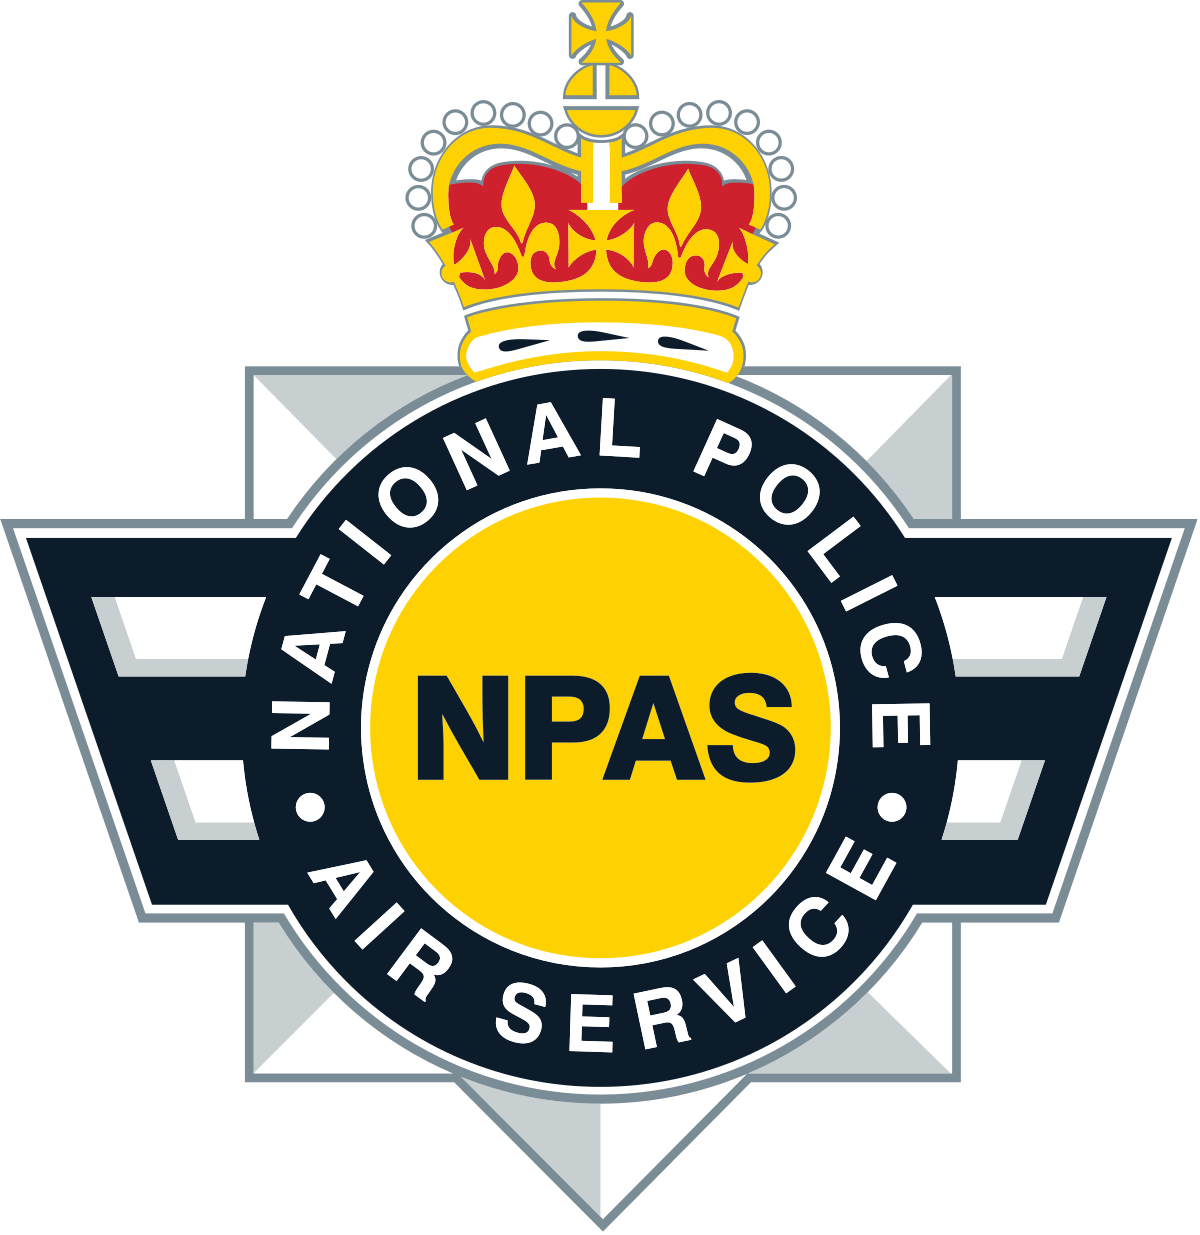 The Police Circle Logo - National Police Air Service